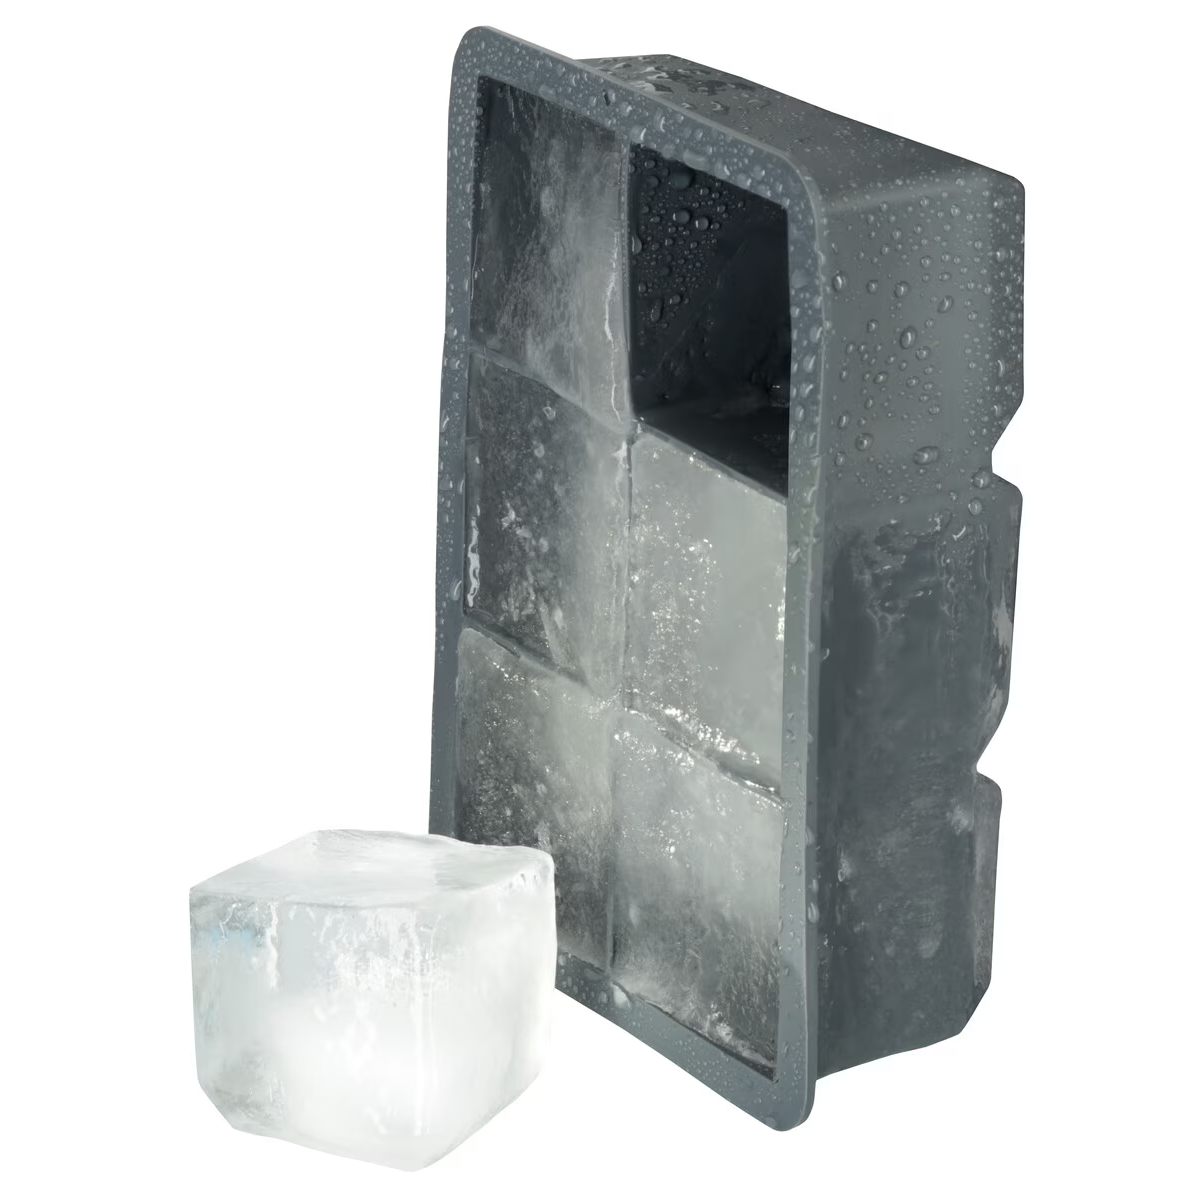 2x Ice Cube Trays for Recovery Tub 2